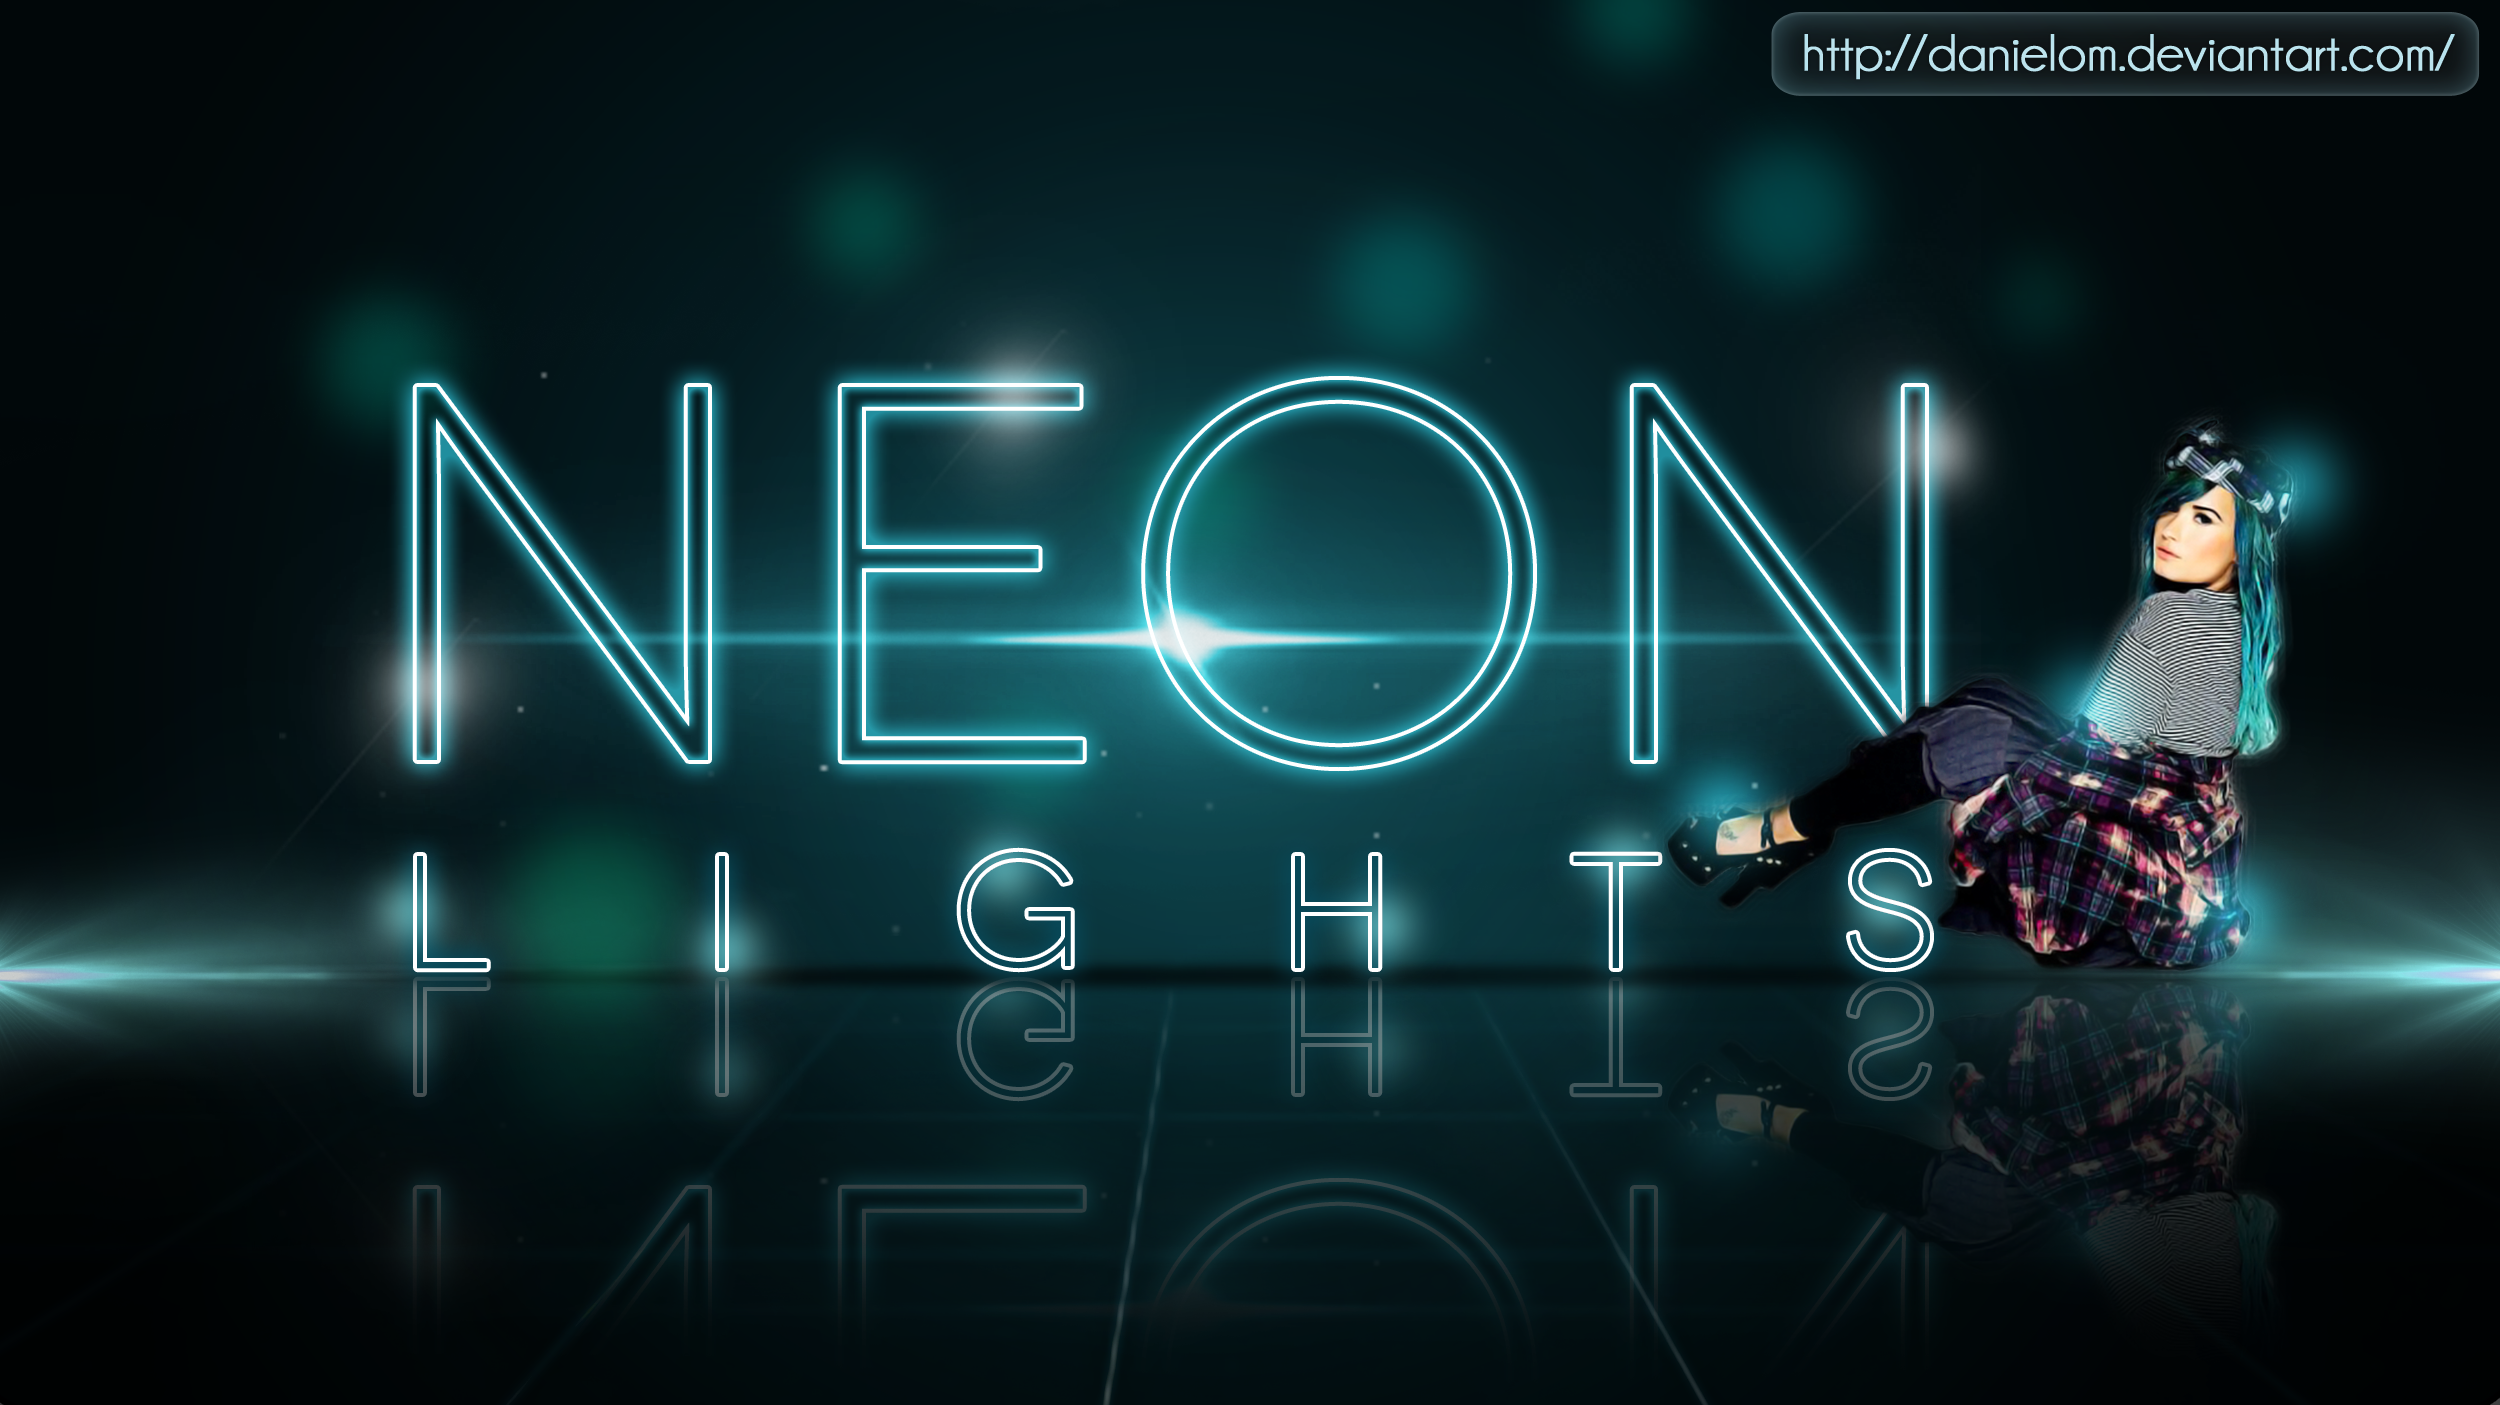 Wallpaper Neon Lights Ps By Danielom